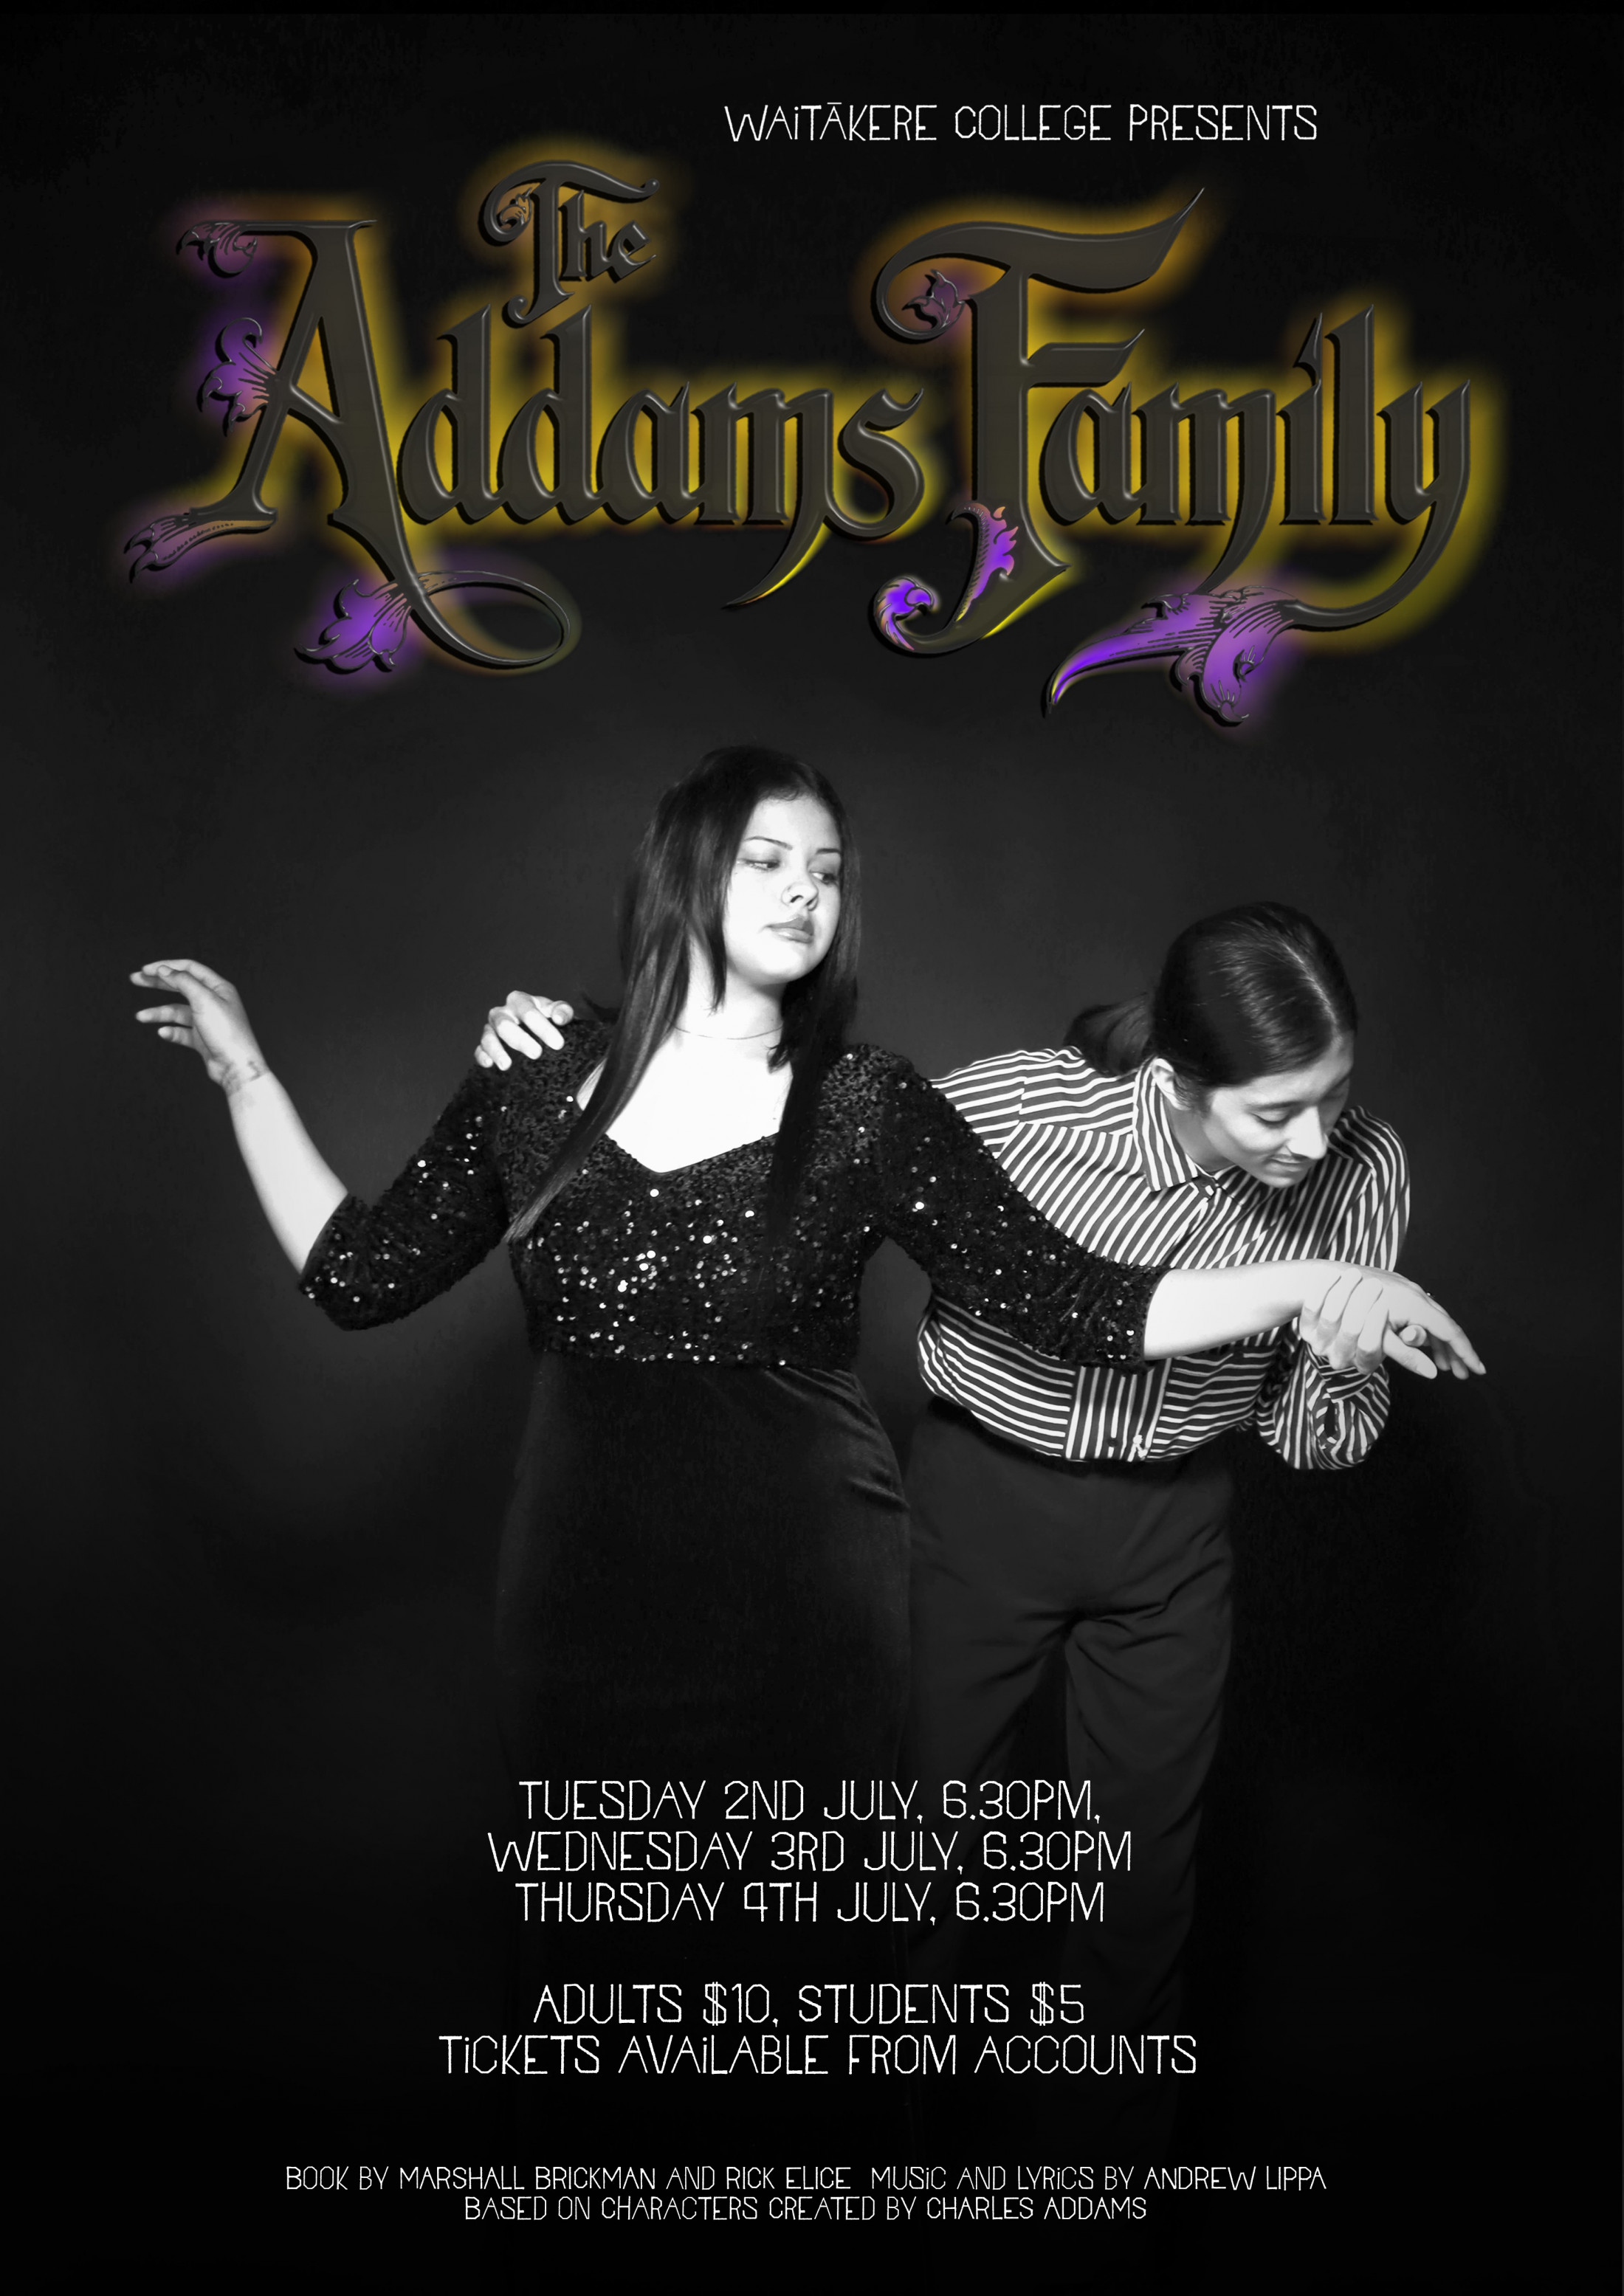 Upcoming School Production - The Addams Family